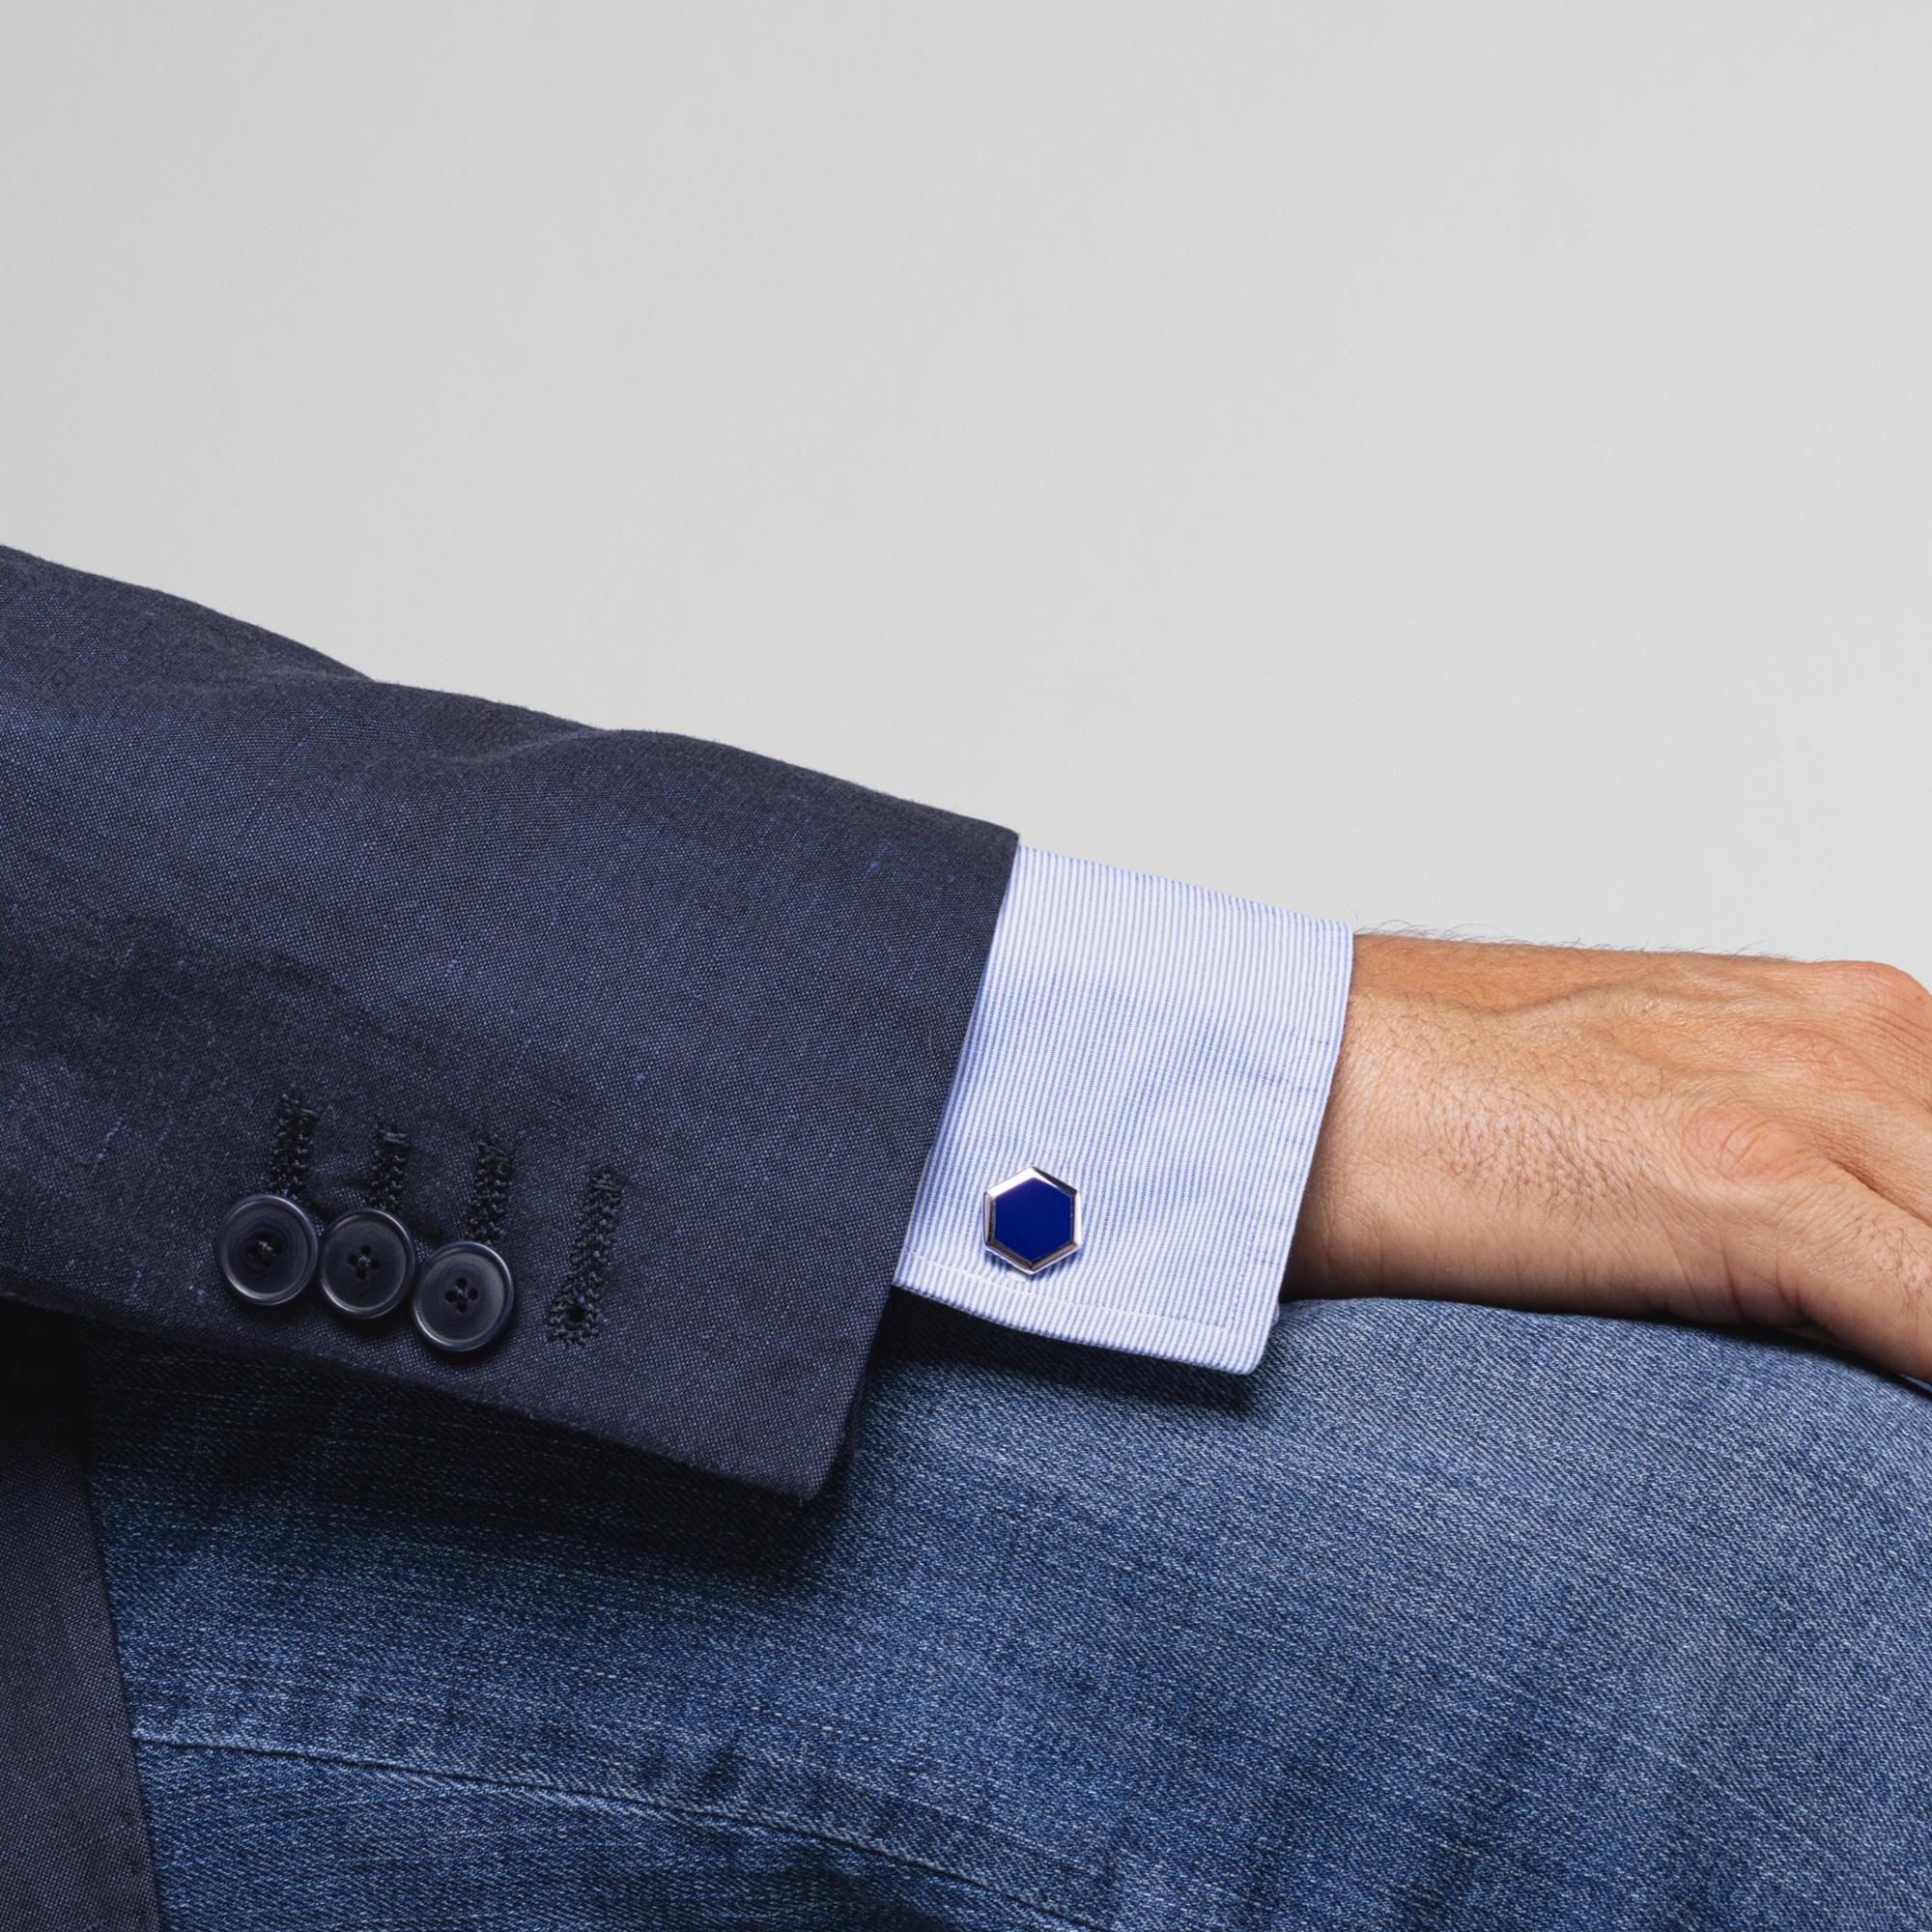 Alex Jona design collection, hand crafted in Italy, 925/°°° sterling silver cufflinks with blue enamel. Dimensions: 0.59